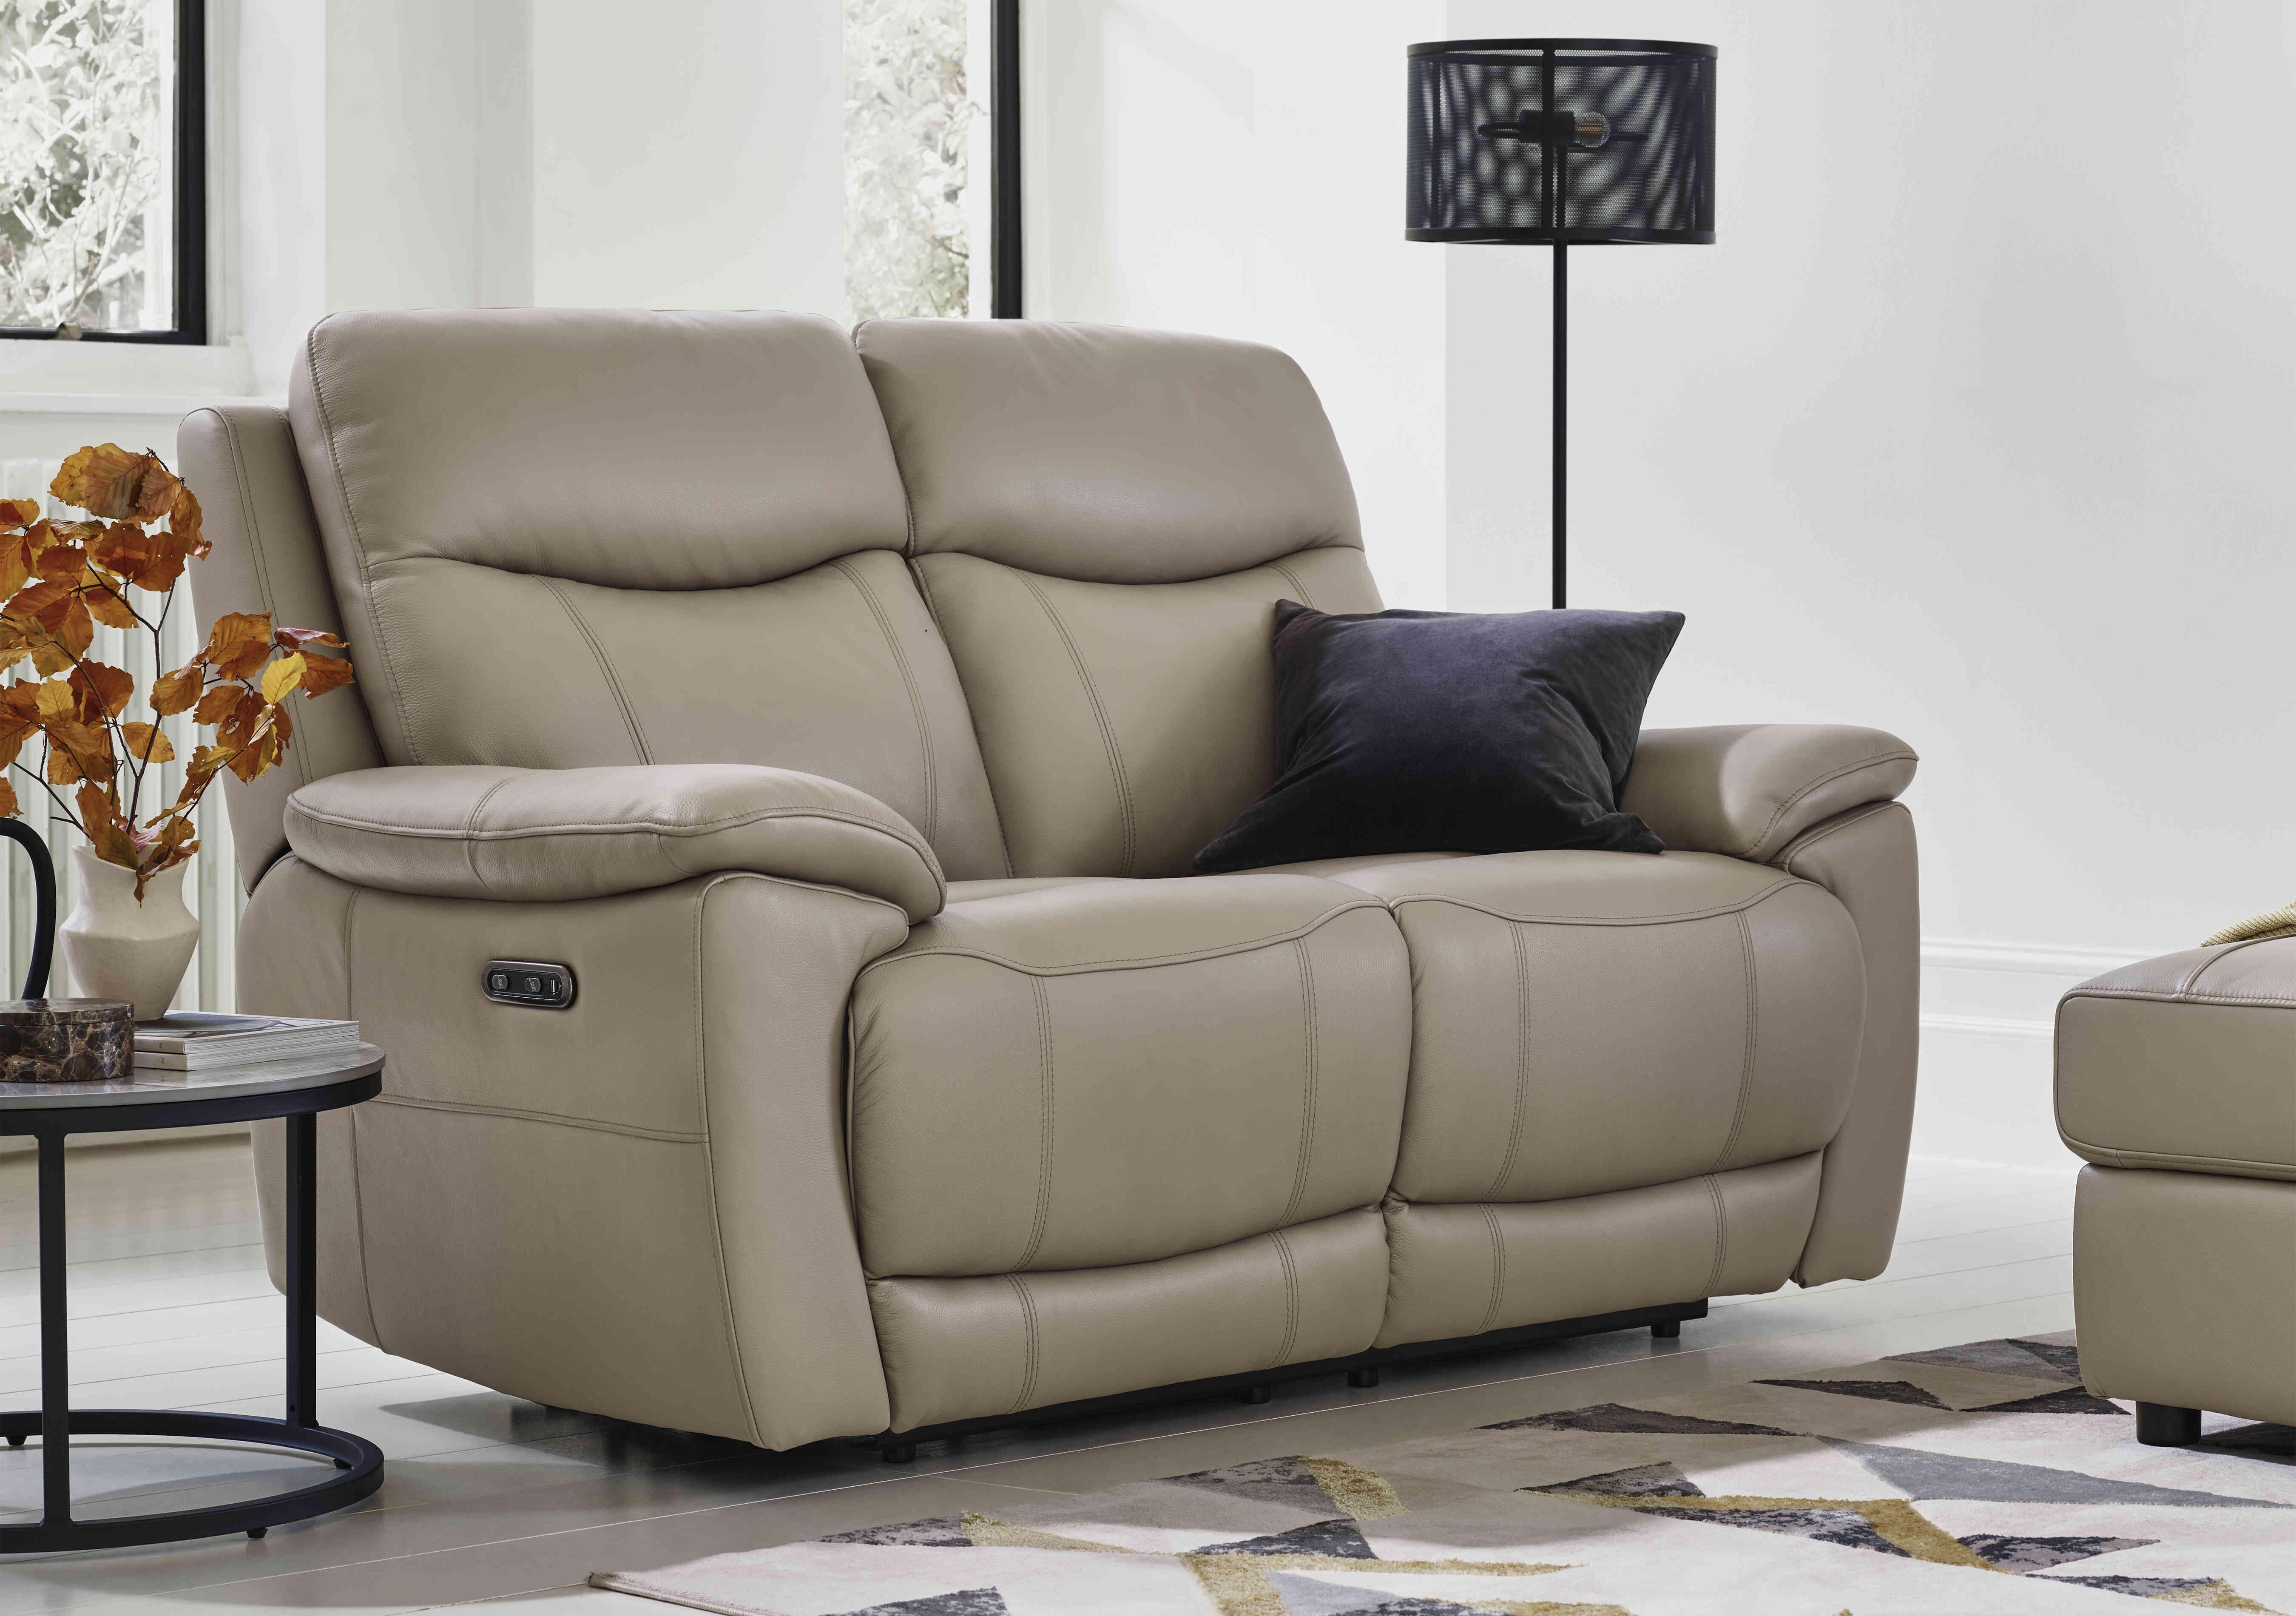 Sloane 3 Seater Leather Sofa in  on Furniture Village